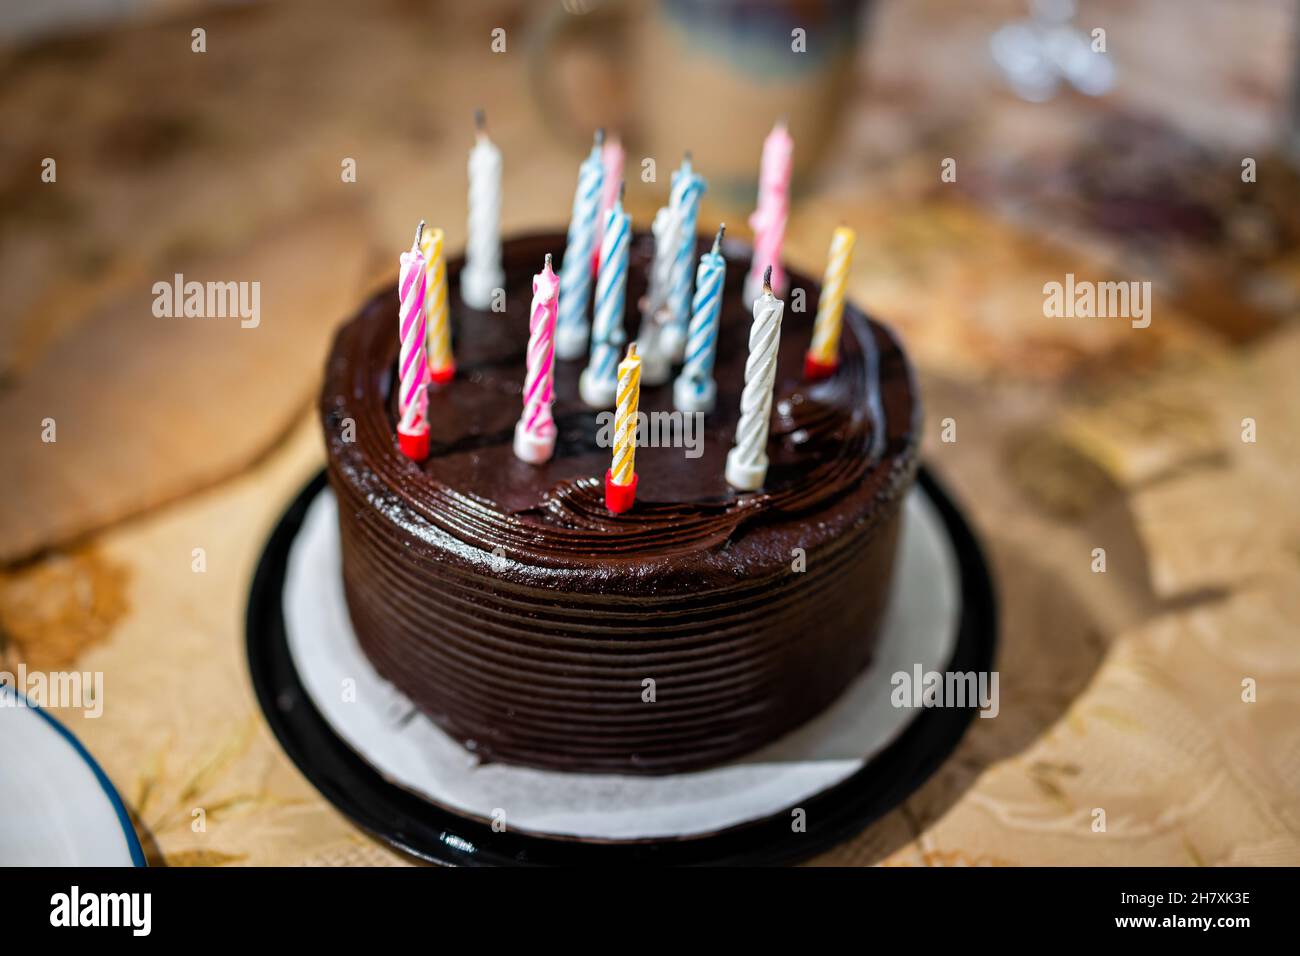 Closeup of homemade chocolate buttercream layer small cake with frosting and colorful pink blue and yellow birthday candles at party birthday celebrat Stock Photo